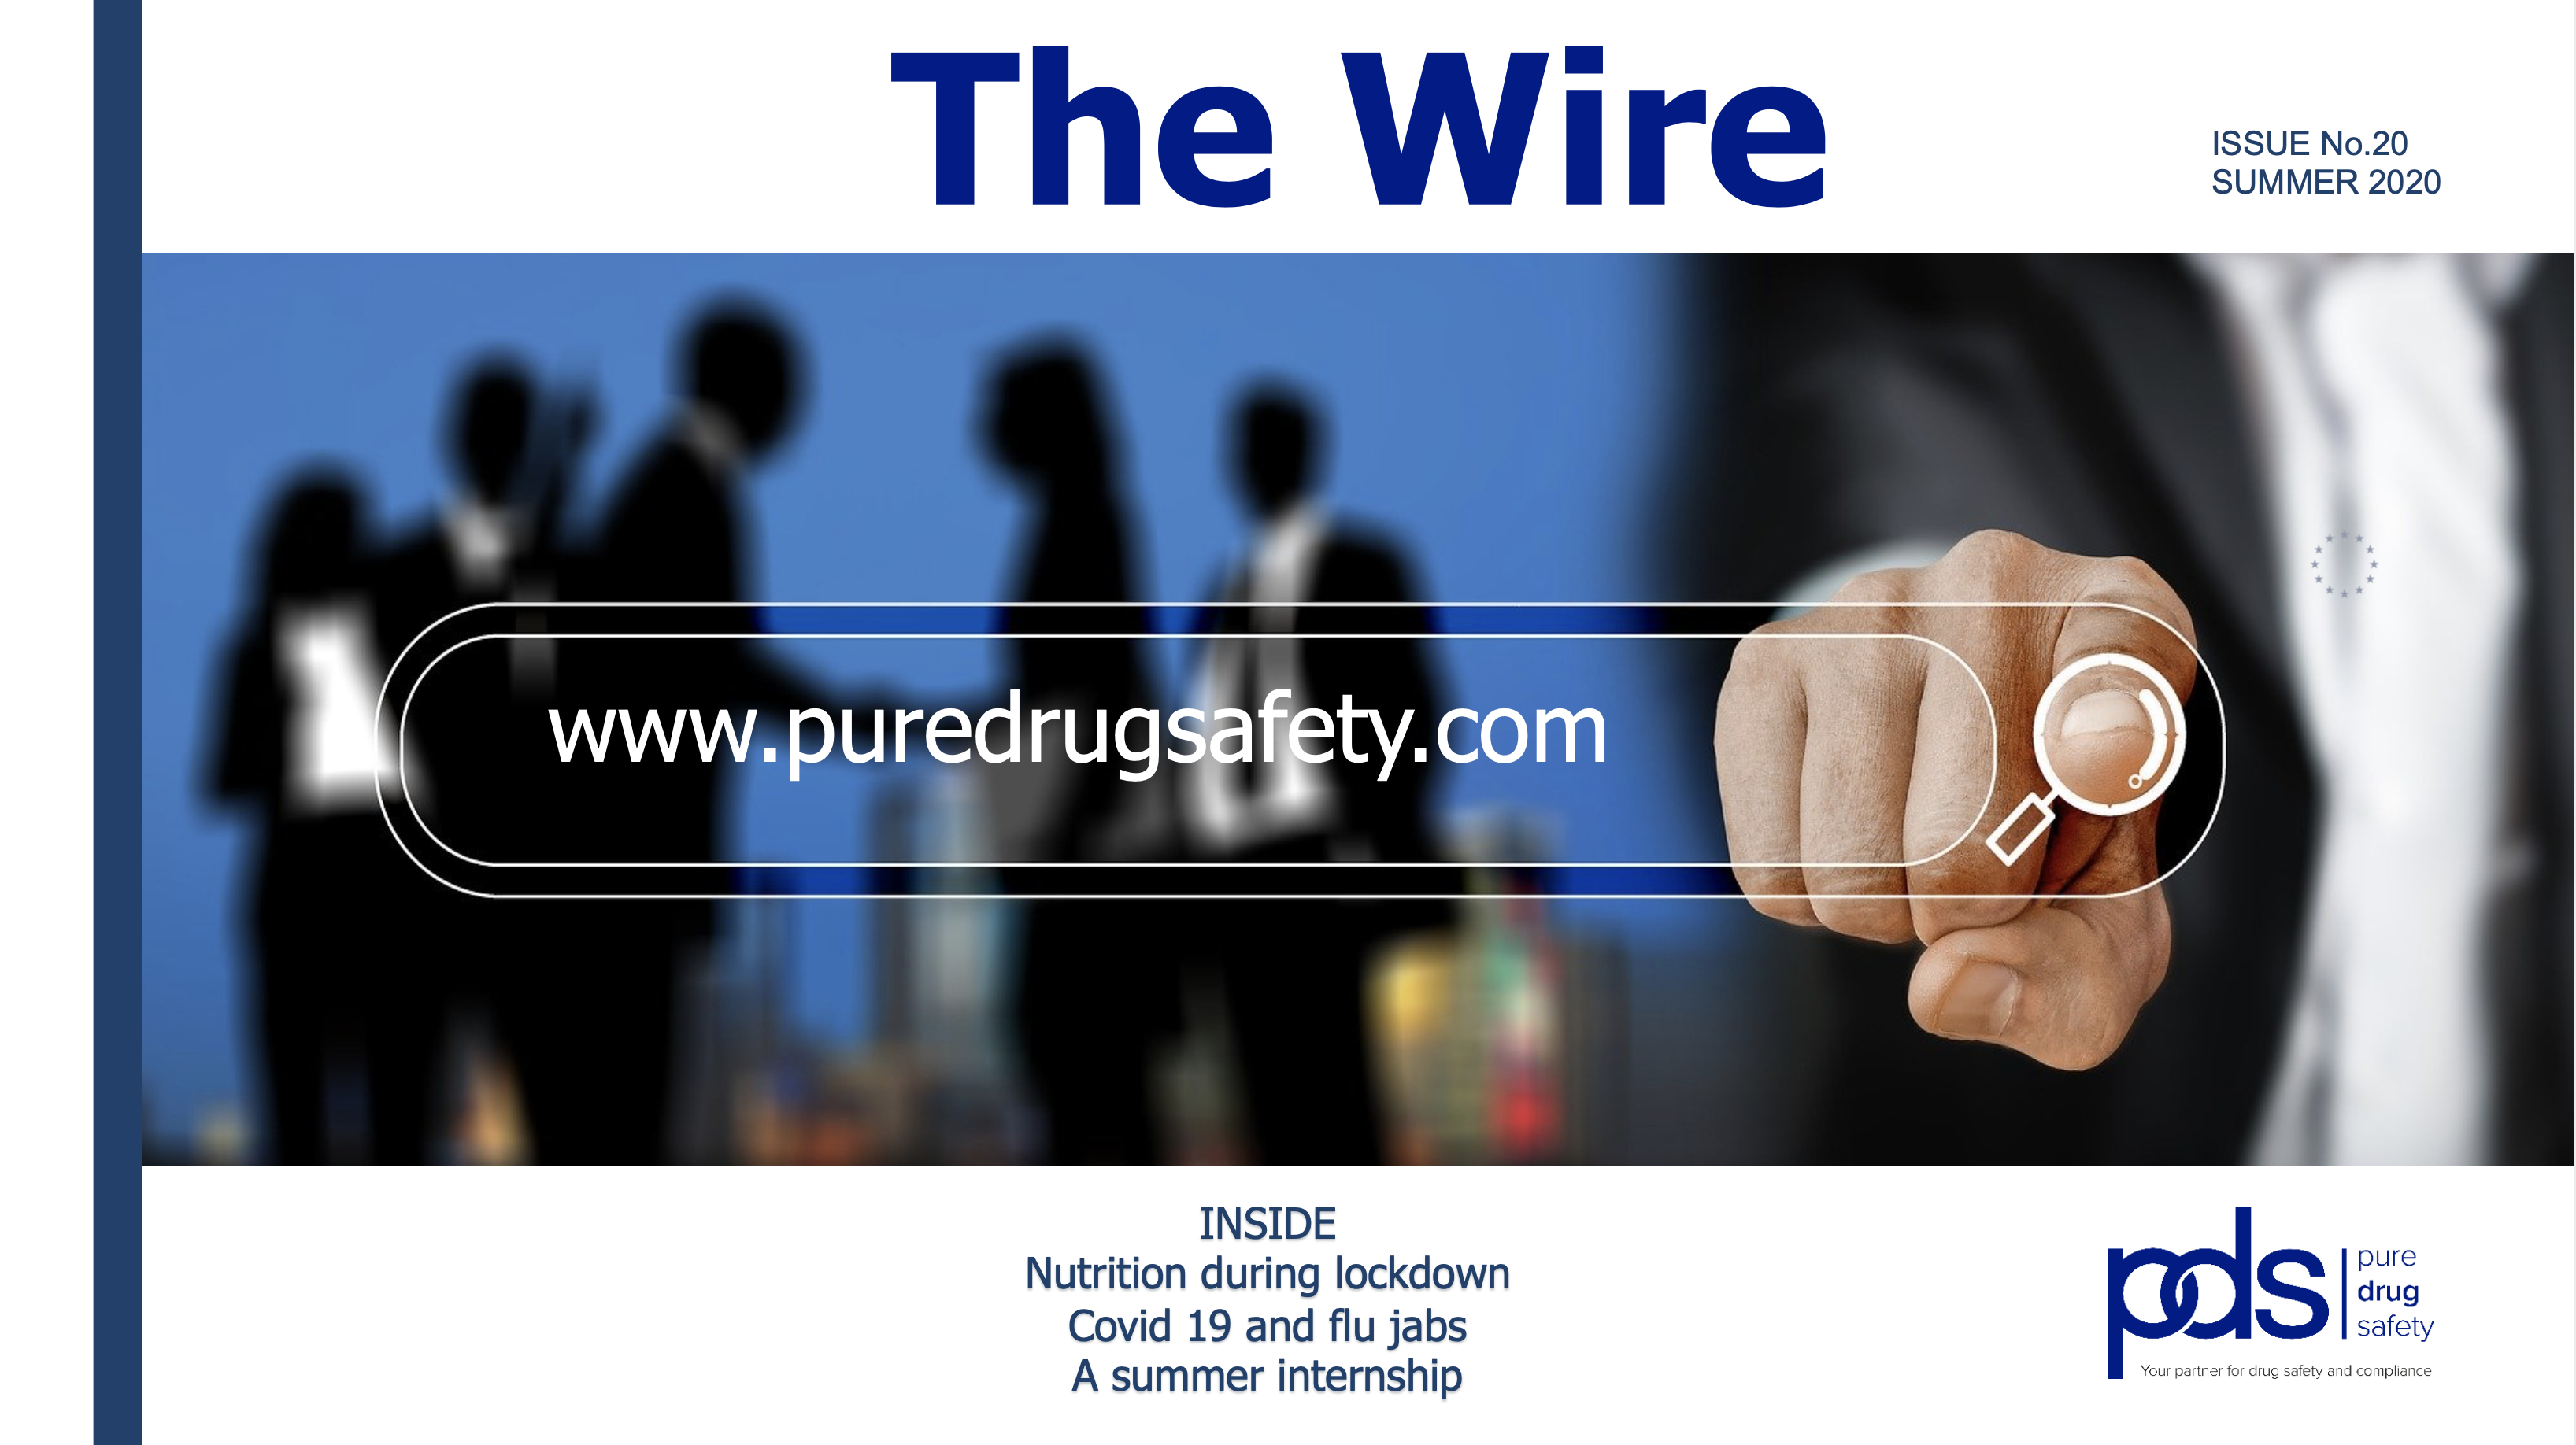 The Wire by Pure Drug Safety